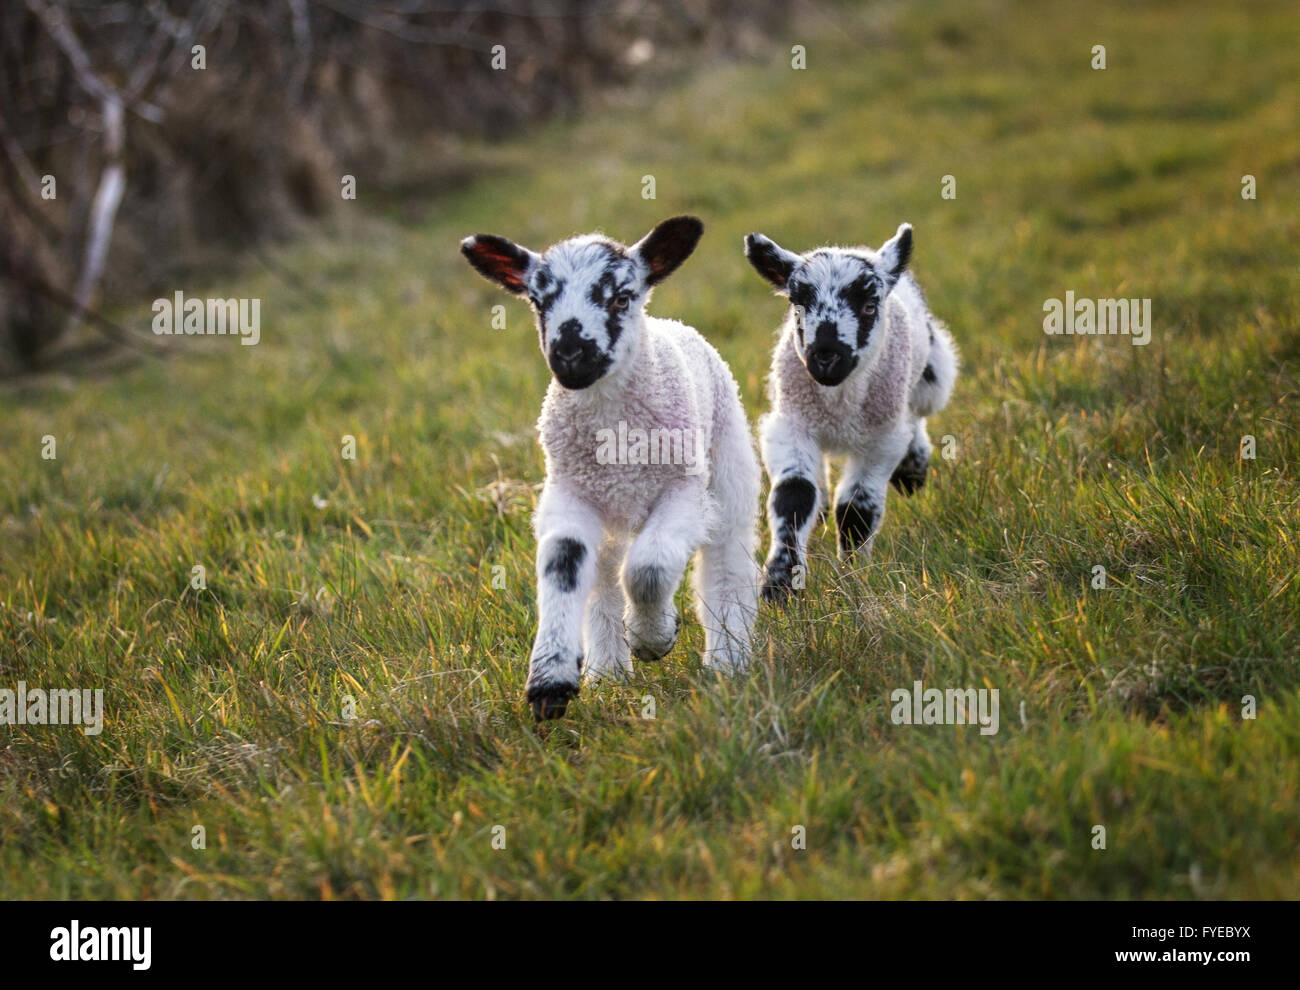 Twin Swaledale lambs running towards camera in a field. They are black and white. Stock Photo